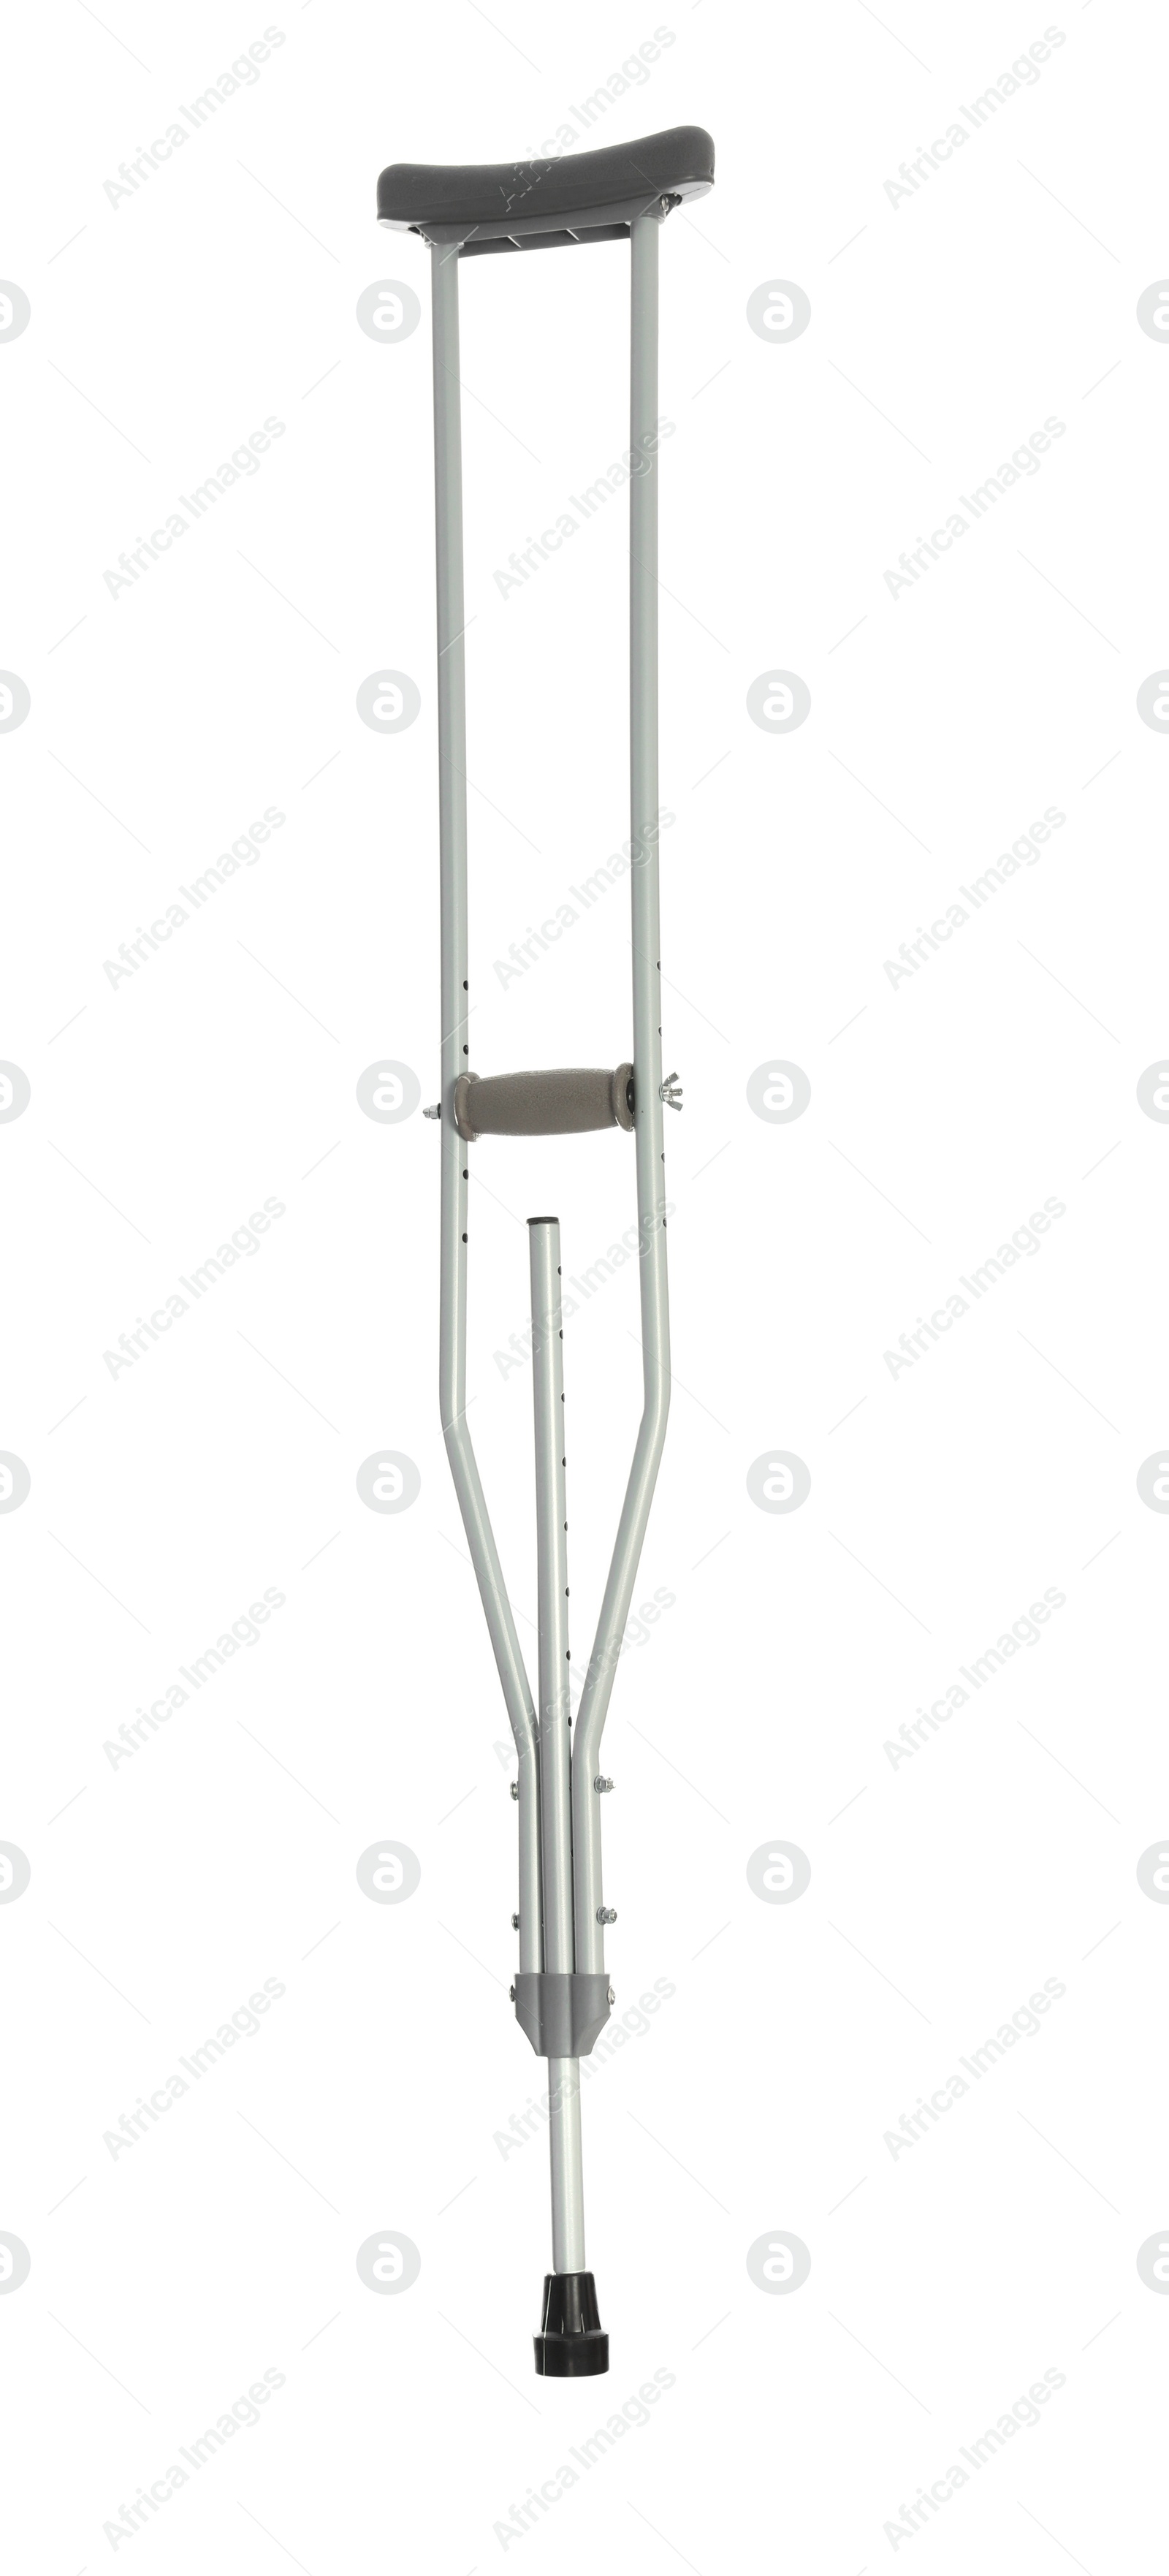 Photo of New adjustable axillary crutch on white background